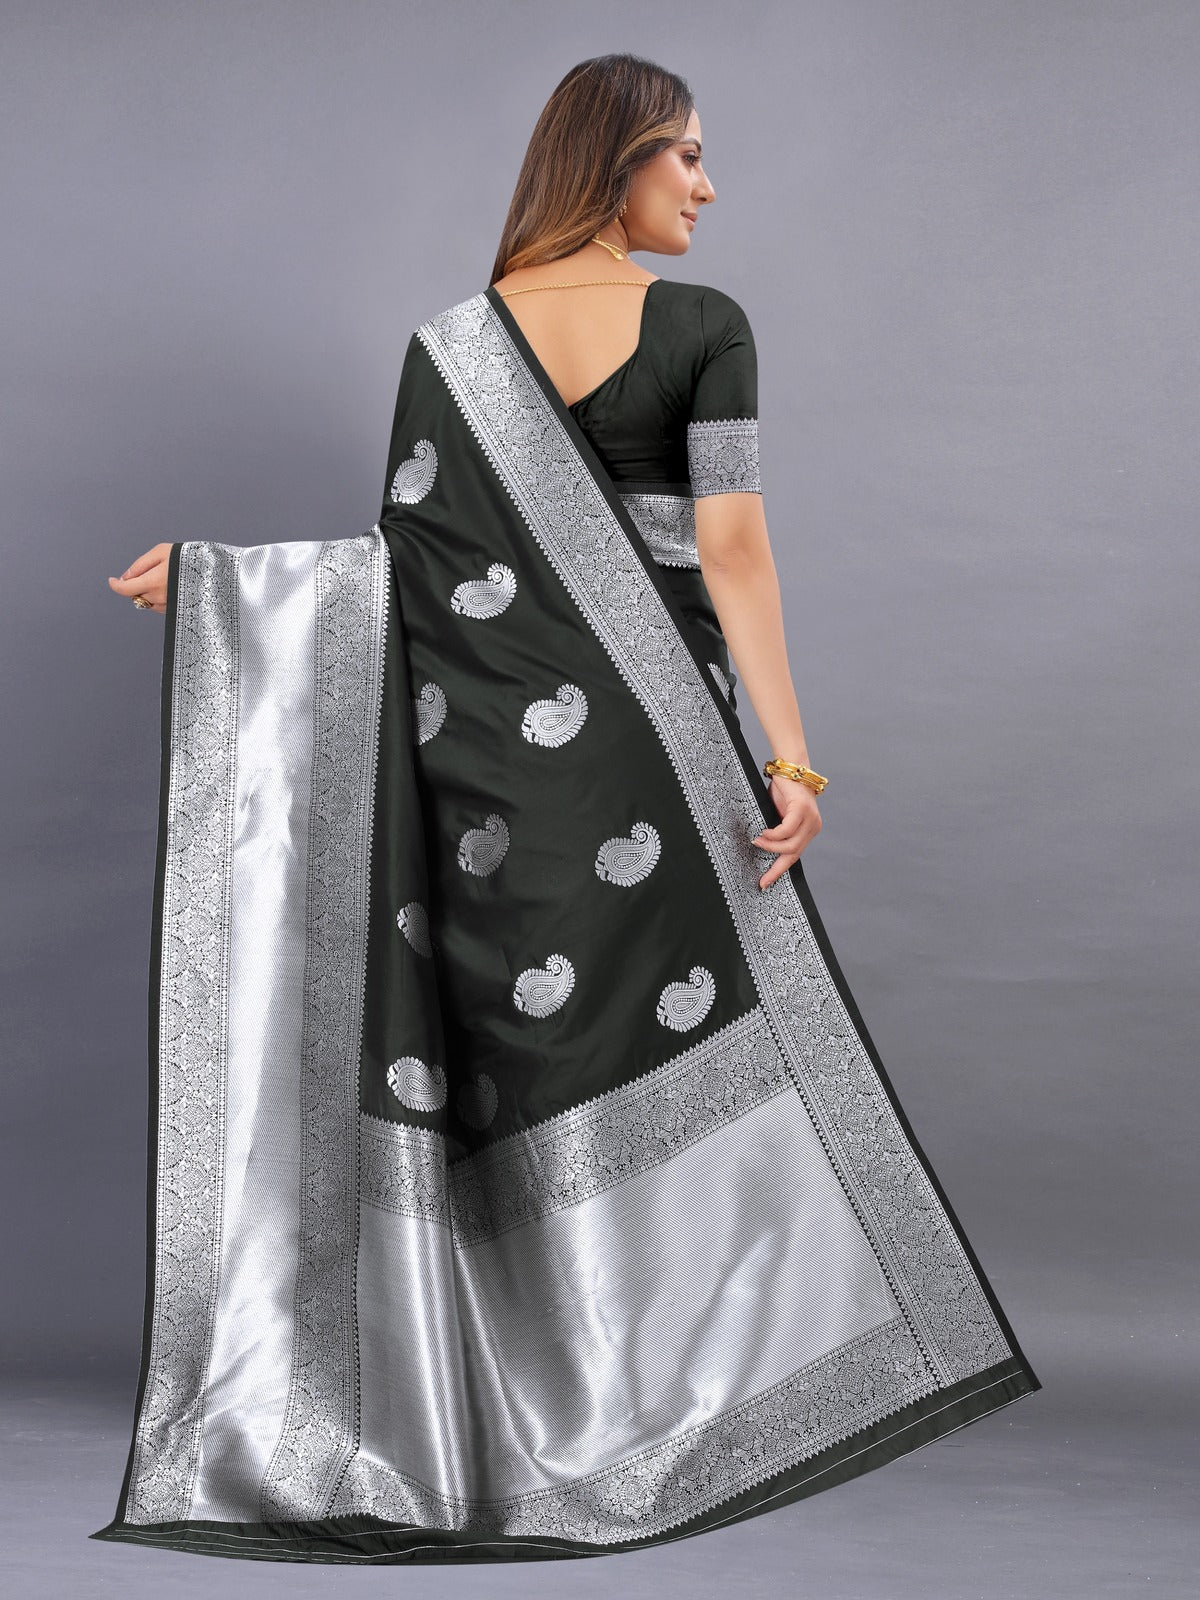 Odette Black Silk Blend Woven Saree with Unstitched Blouse for Women